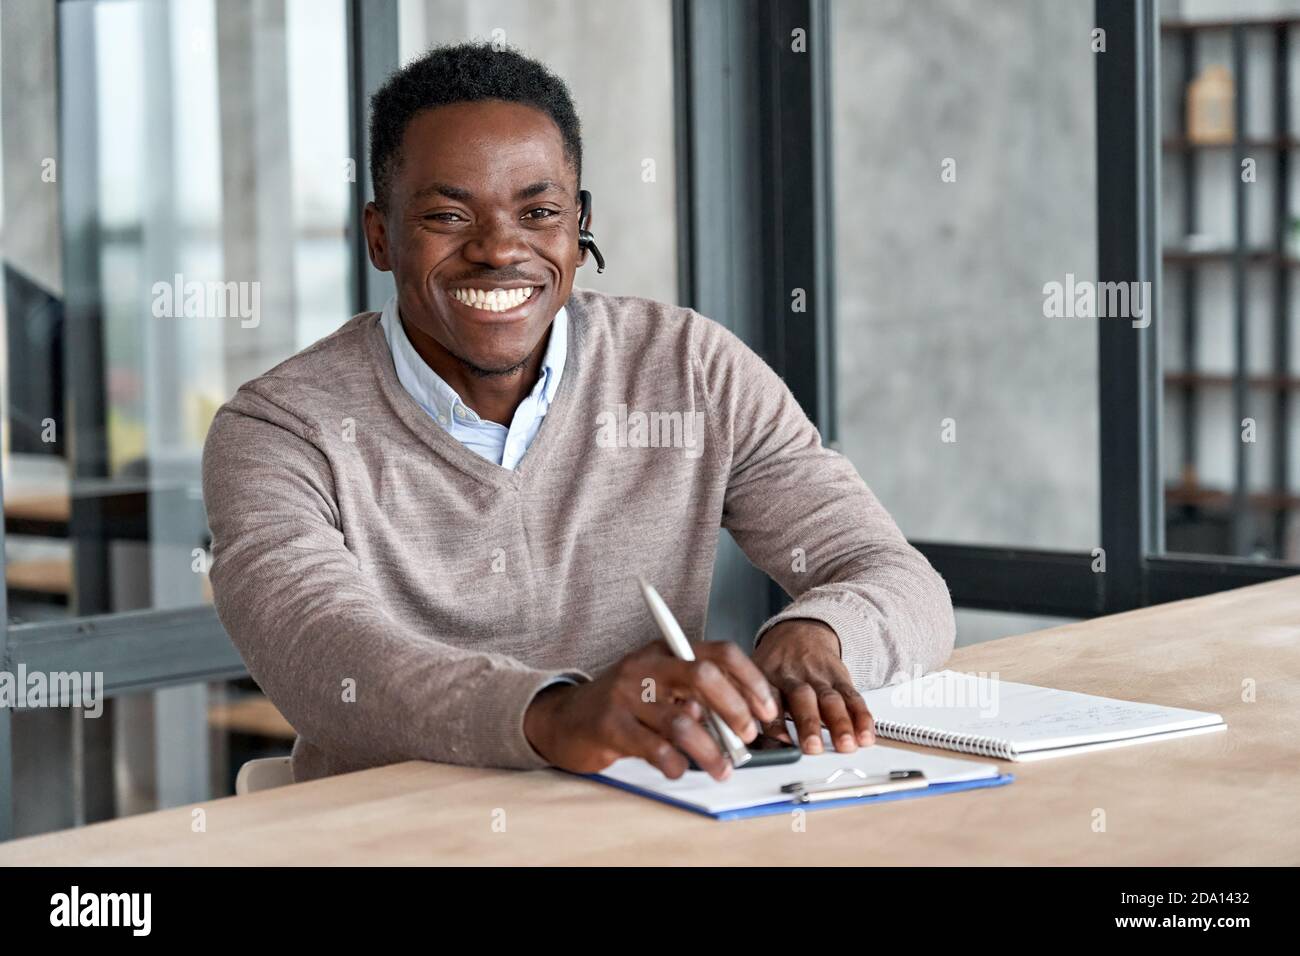 Cheerful african business man wearing headset laughing looking at camera. Stock Photo